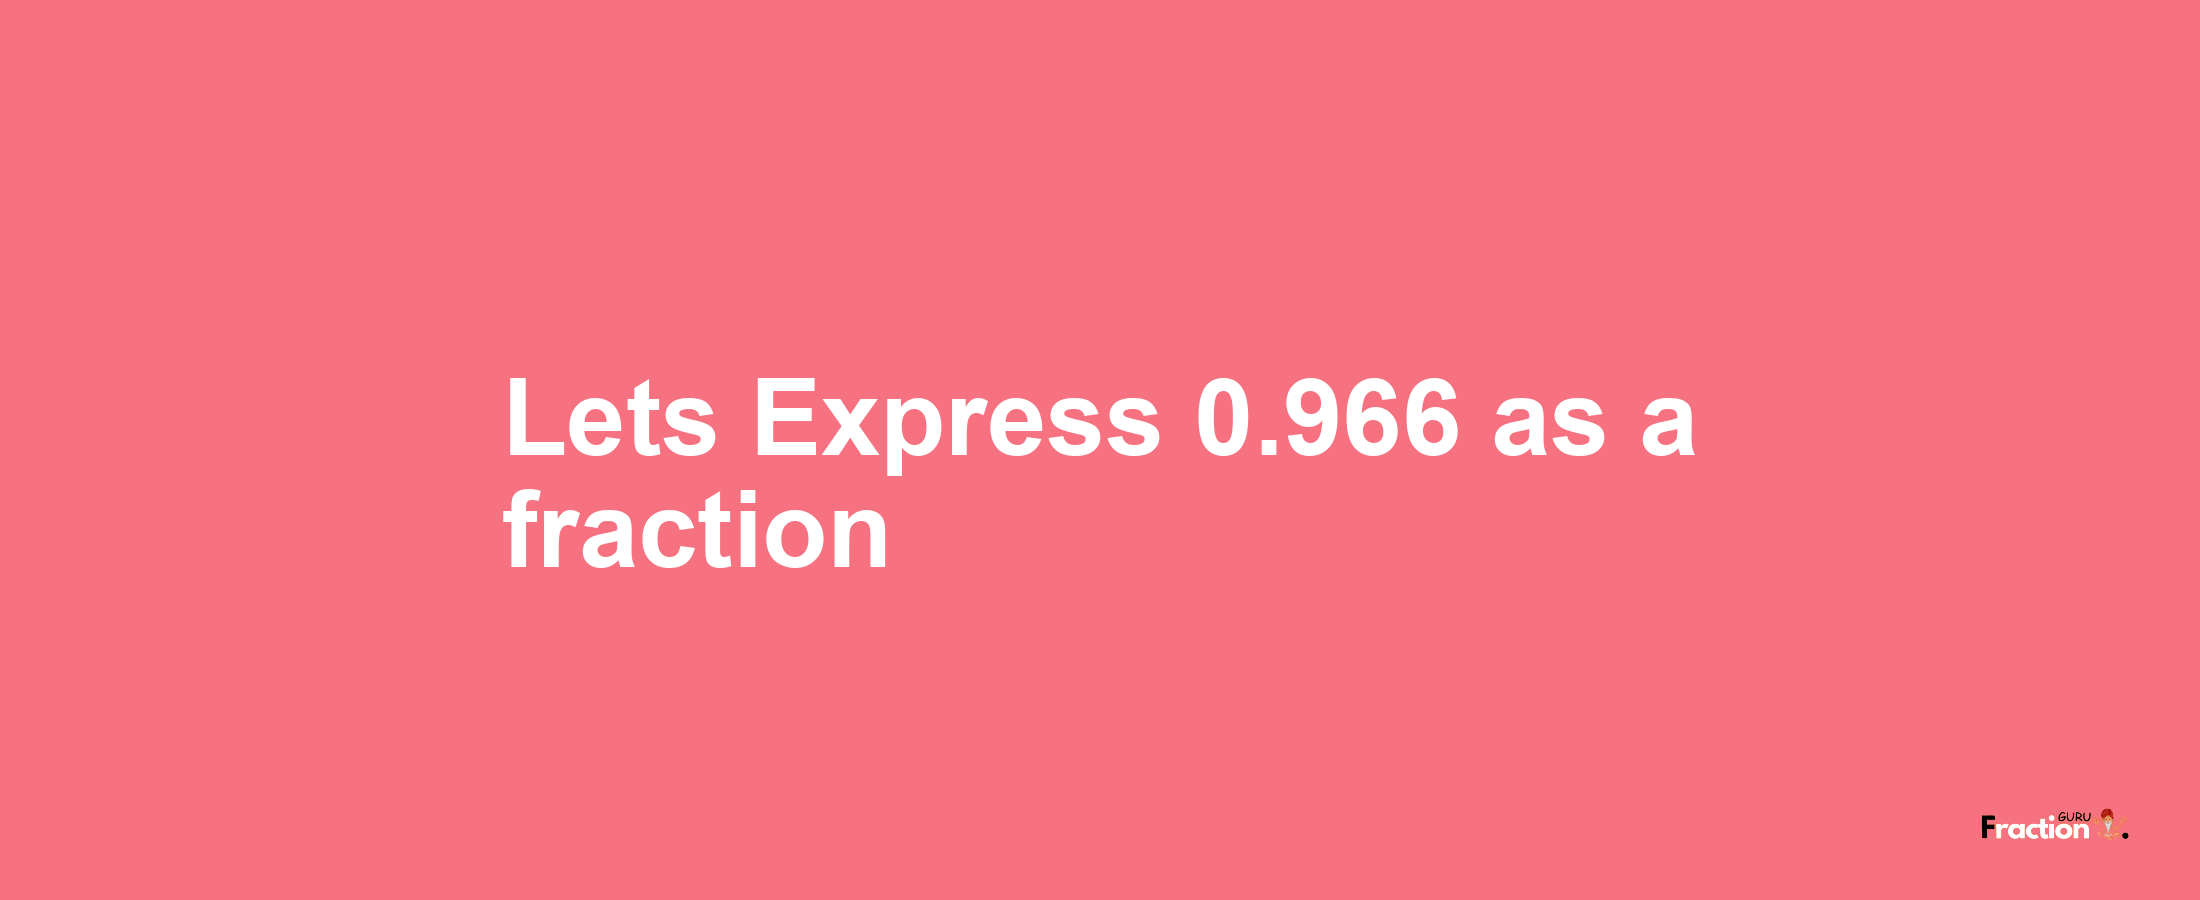 Lets Express 0.966 as afraction